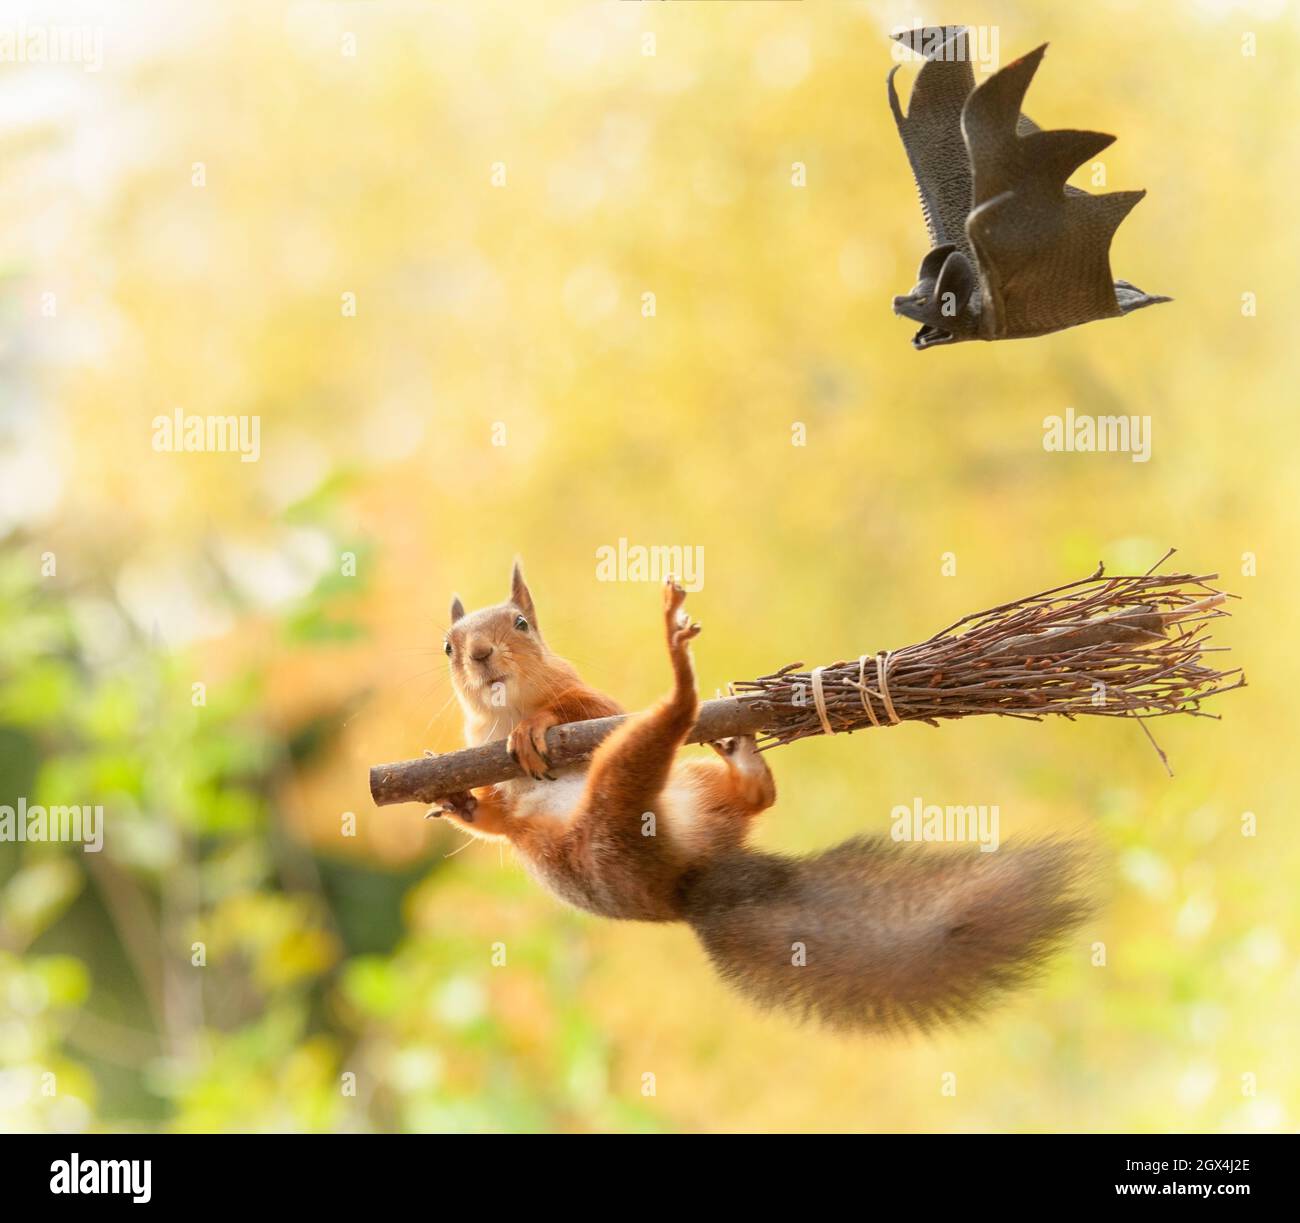 red squirrel hanging at a broom with a bat Stock Photo - Alamy